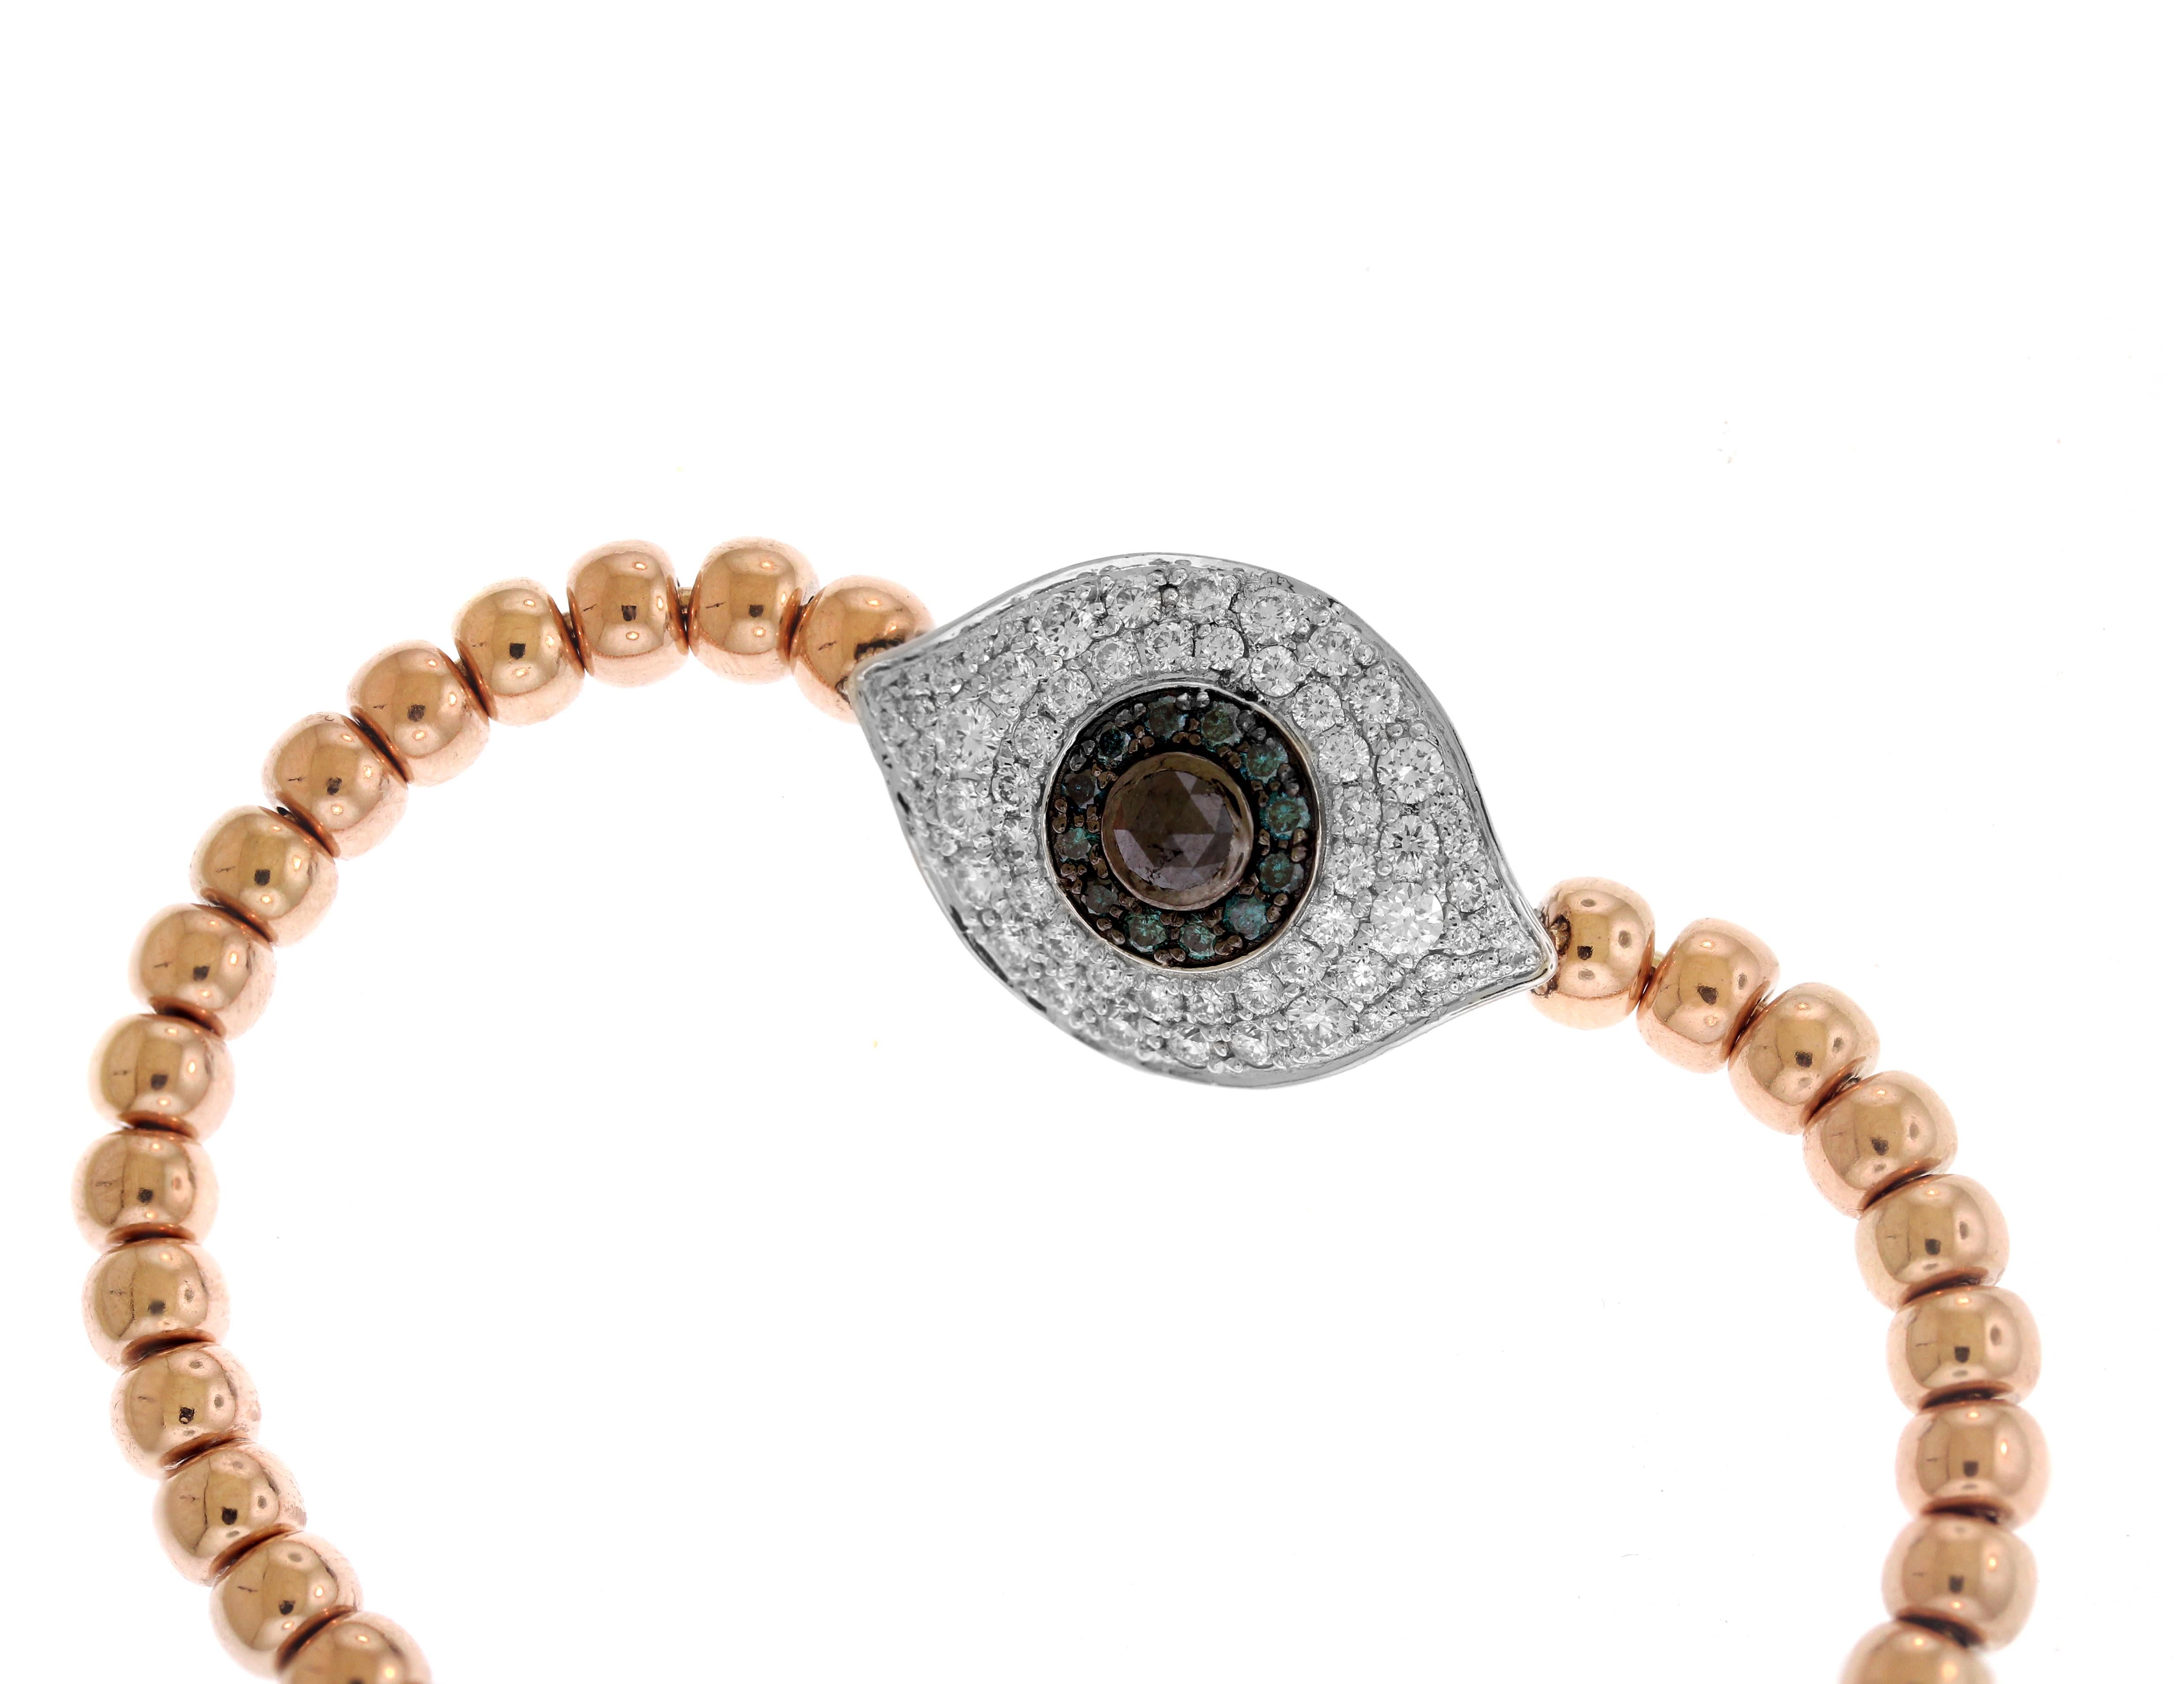 IF YOU ARE REALLY INTERESTED, CONTACT US WITH ANY REASONABLE OFFER. WE WILL TRY OUR BEST TO MAKE YOU HAPPY!

14K Rose and White Gold Black Diamond Flexible Evil Eye Bracelet 

1.33 carat H color, SI clarity White Diamonds

0.26 carat Black